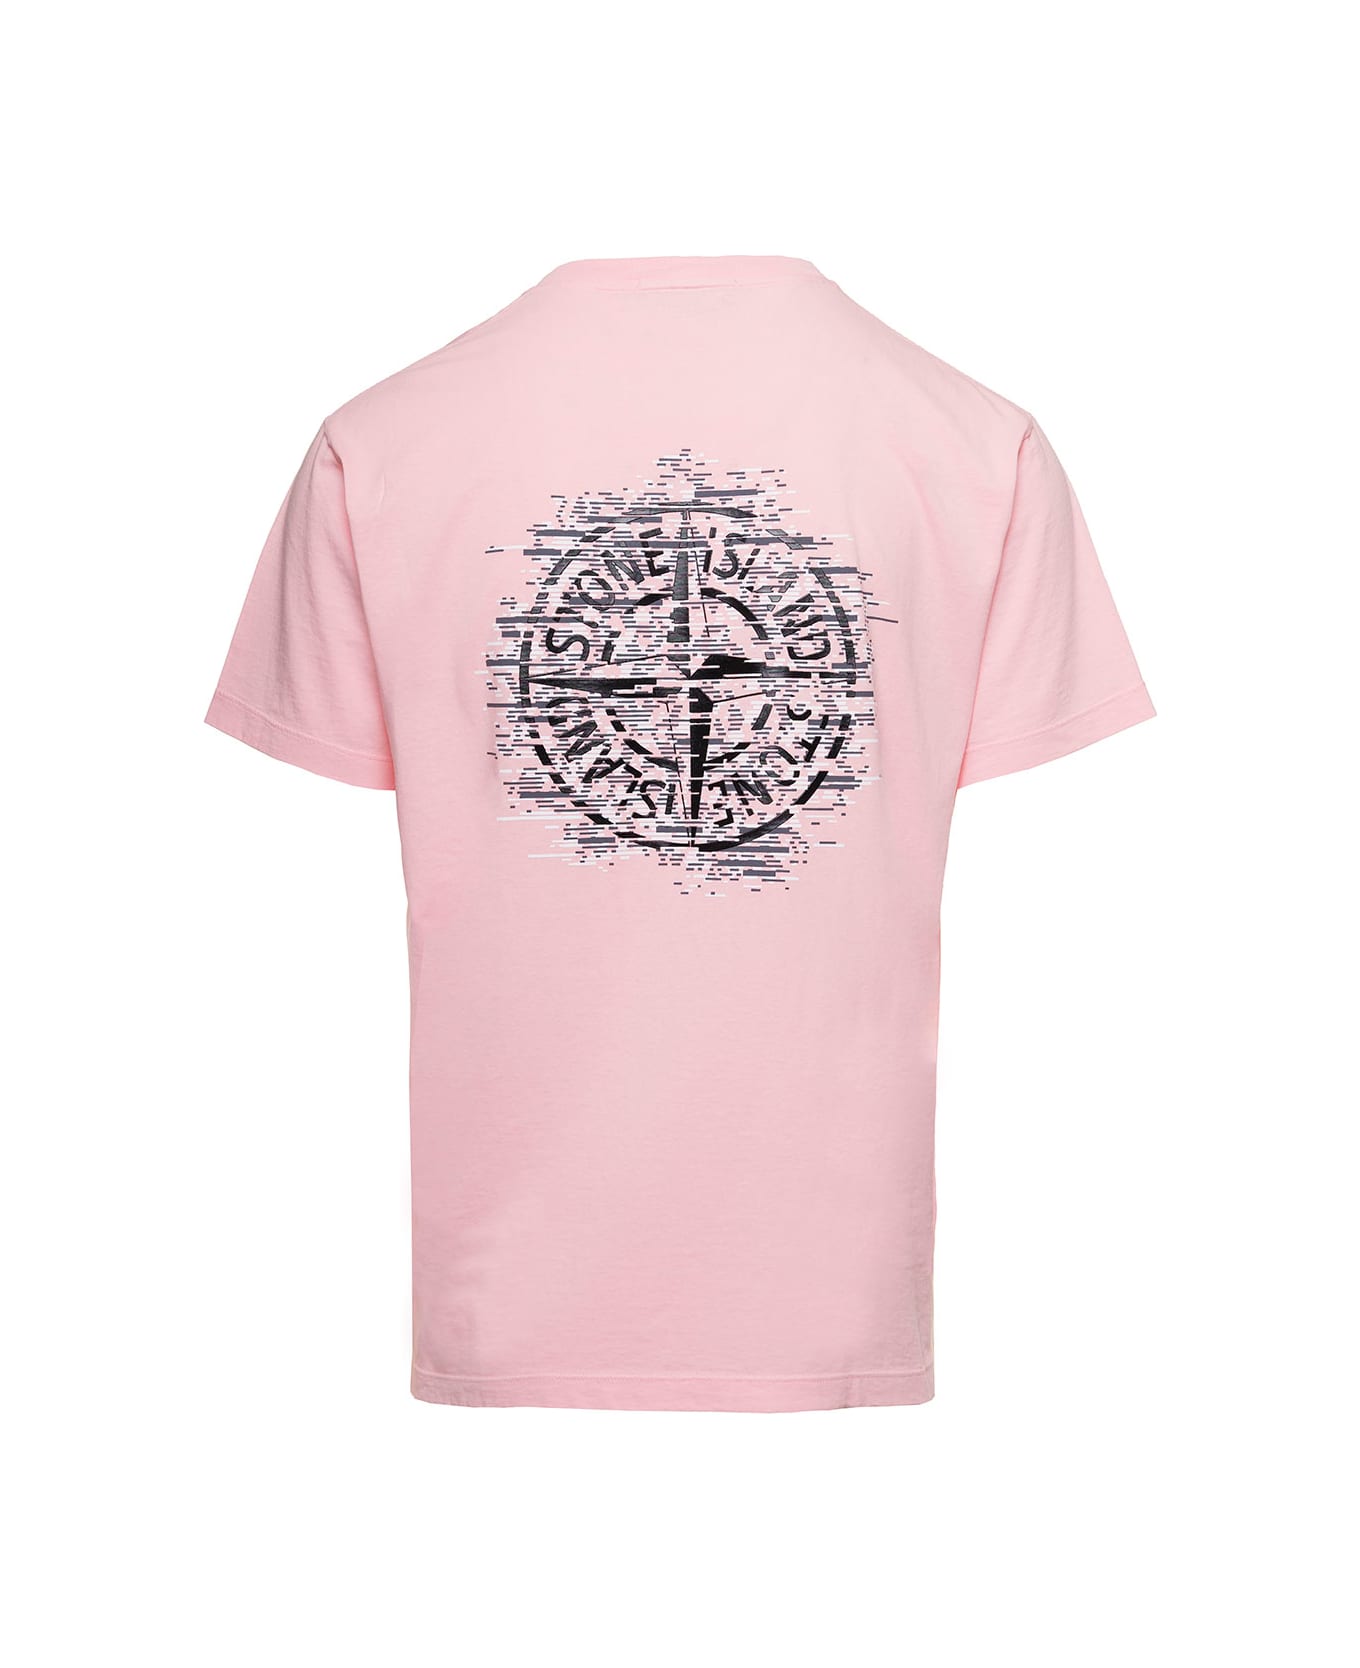 Stone Island Light Pink Crewneck T-shirt With Small Logo Print On The Front In Cotton Man - Pink